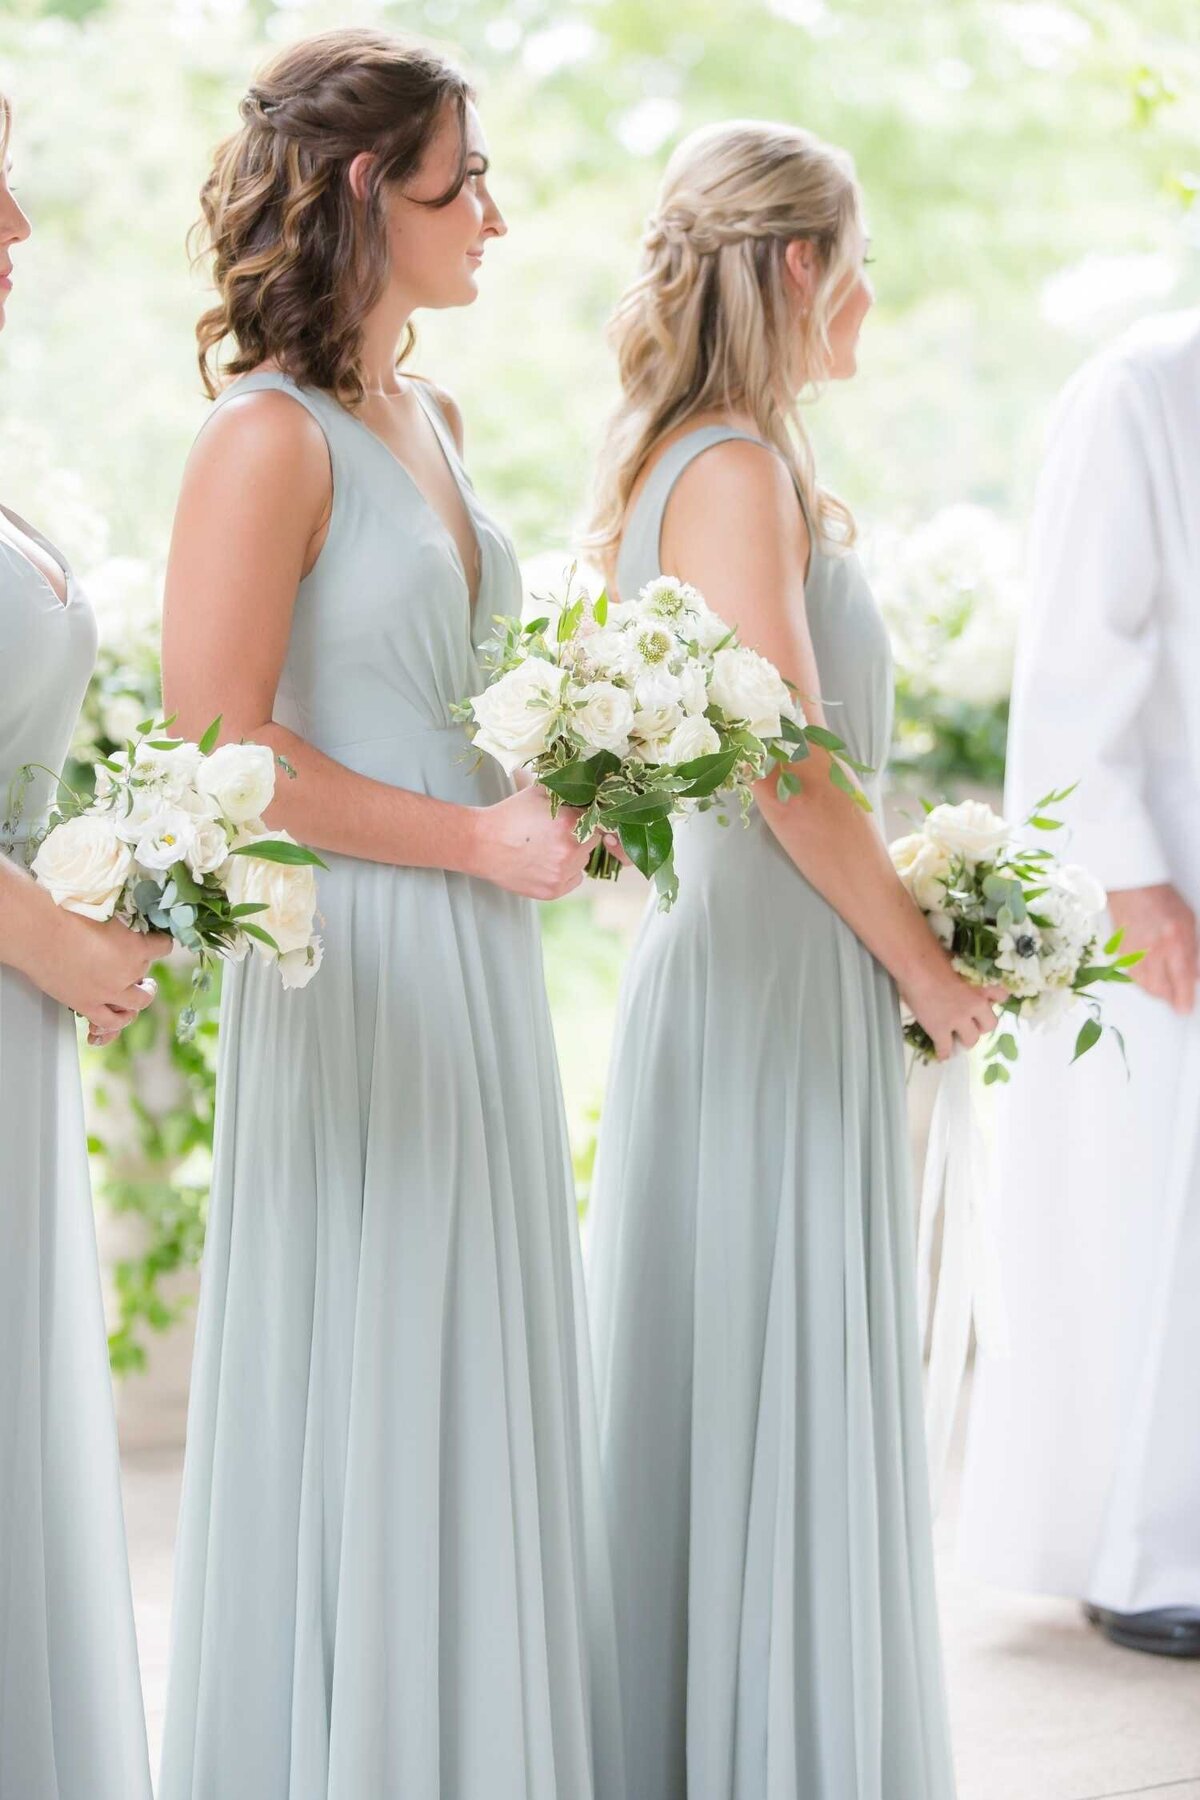 Bridesmaids with lush green and white garden bouquets during the ceremony at Luxury Chicago Outdoor Historic Wedding Venue.